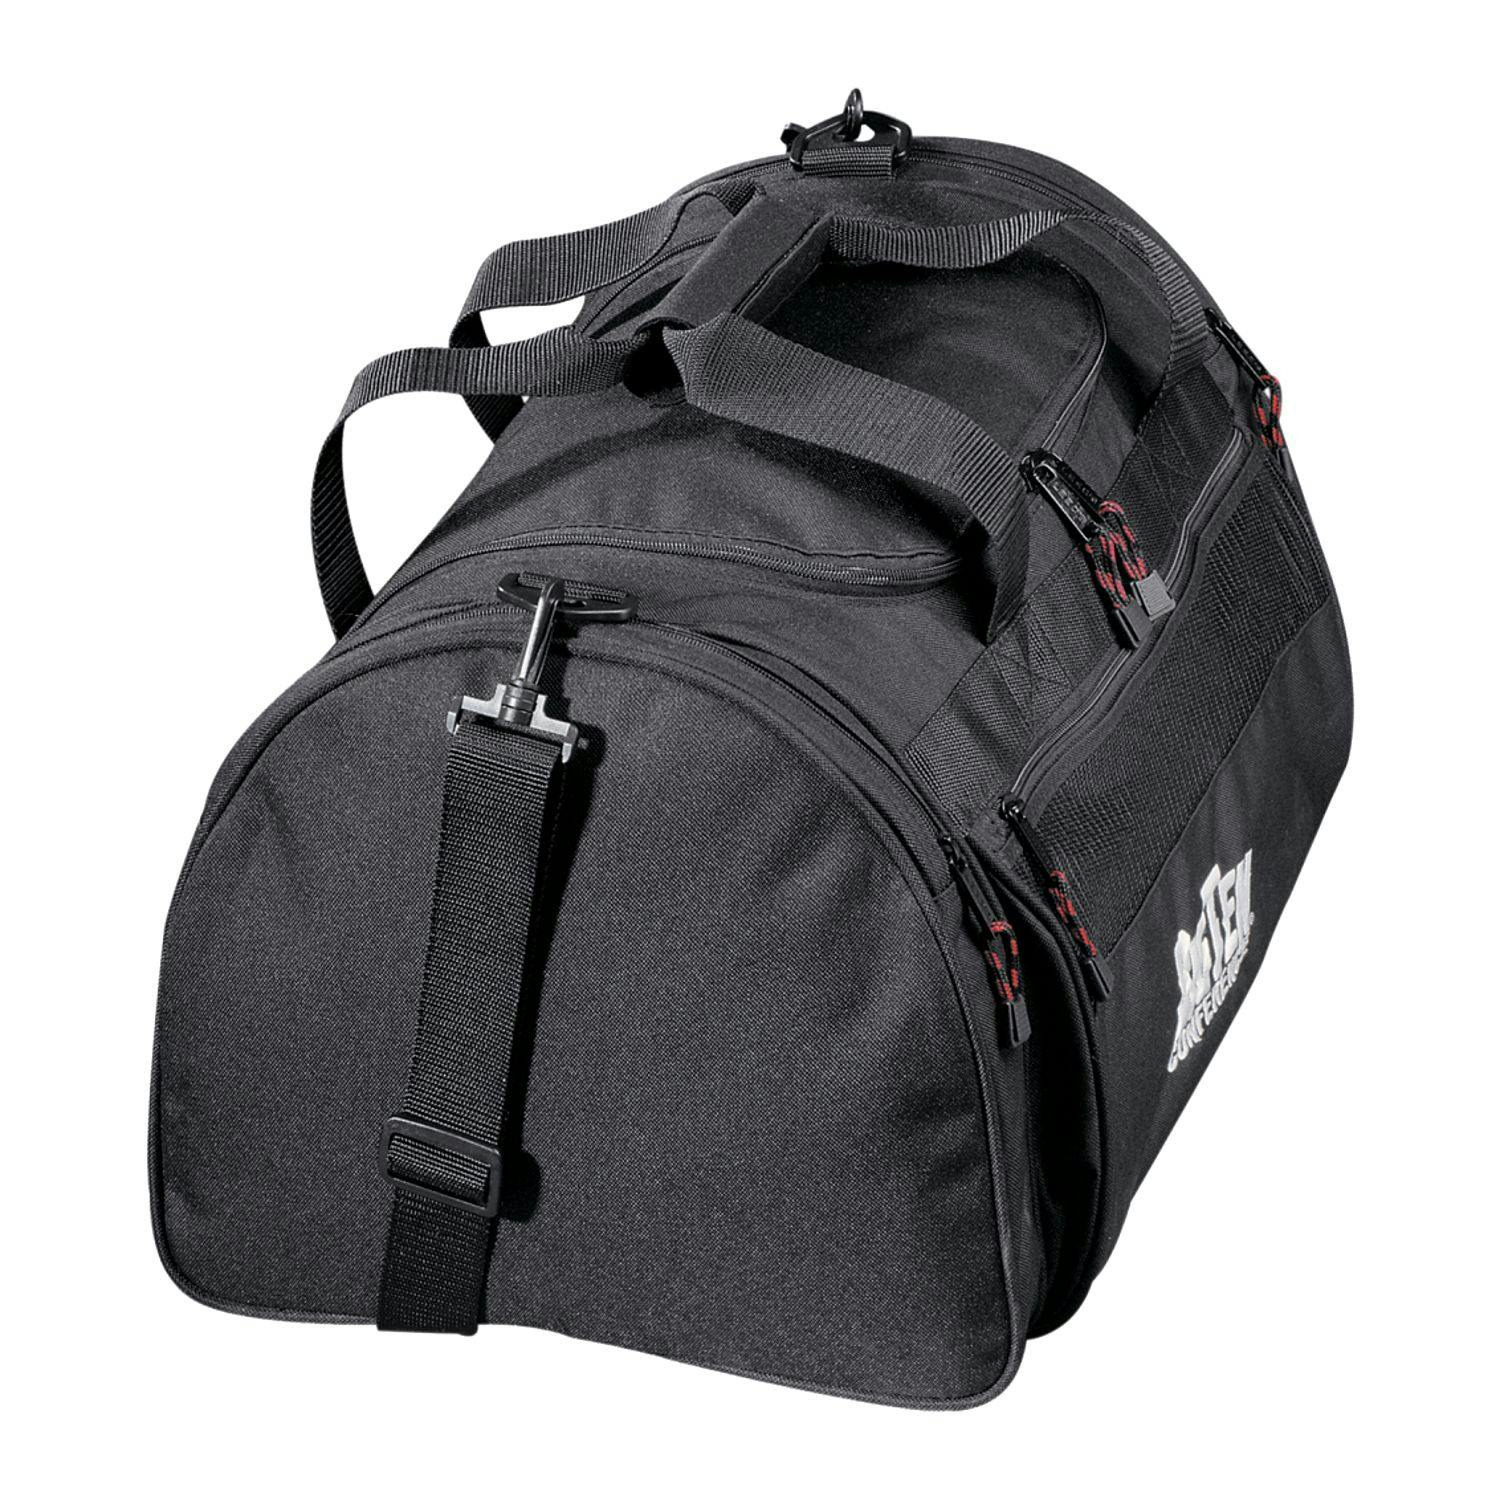 Excel Sport Deluxe 20" Duffel Bag - additional Image 2